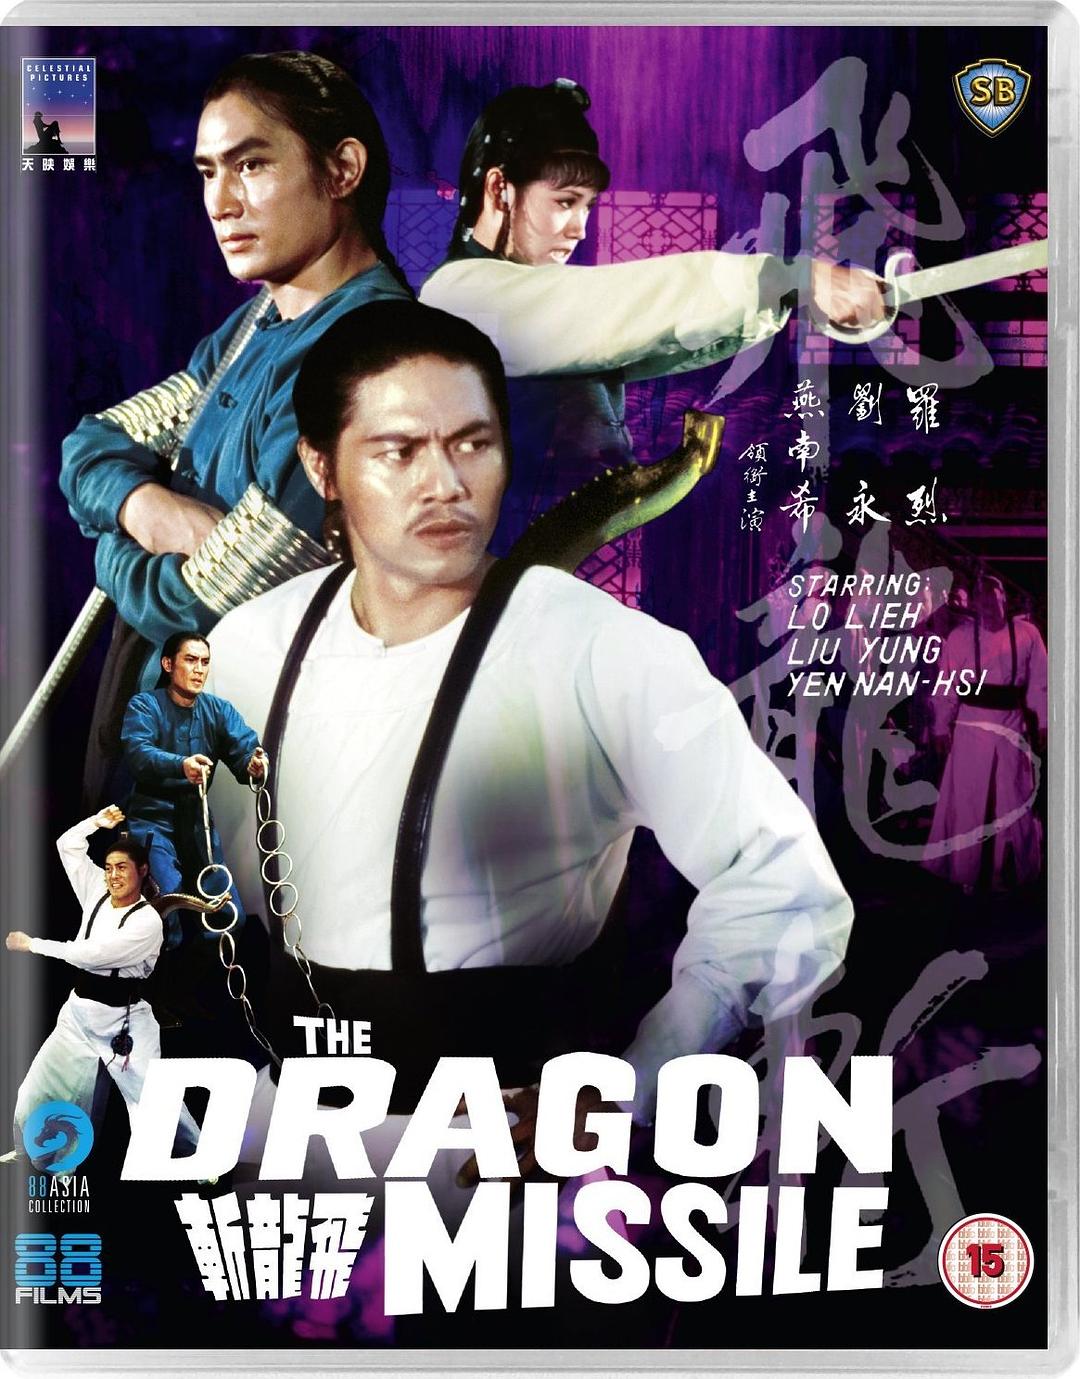 w The.Dragon.Missile.1976.1080p.BluRay.x264-GHOULS 6.56GB-1.png